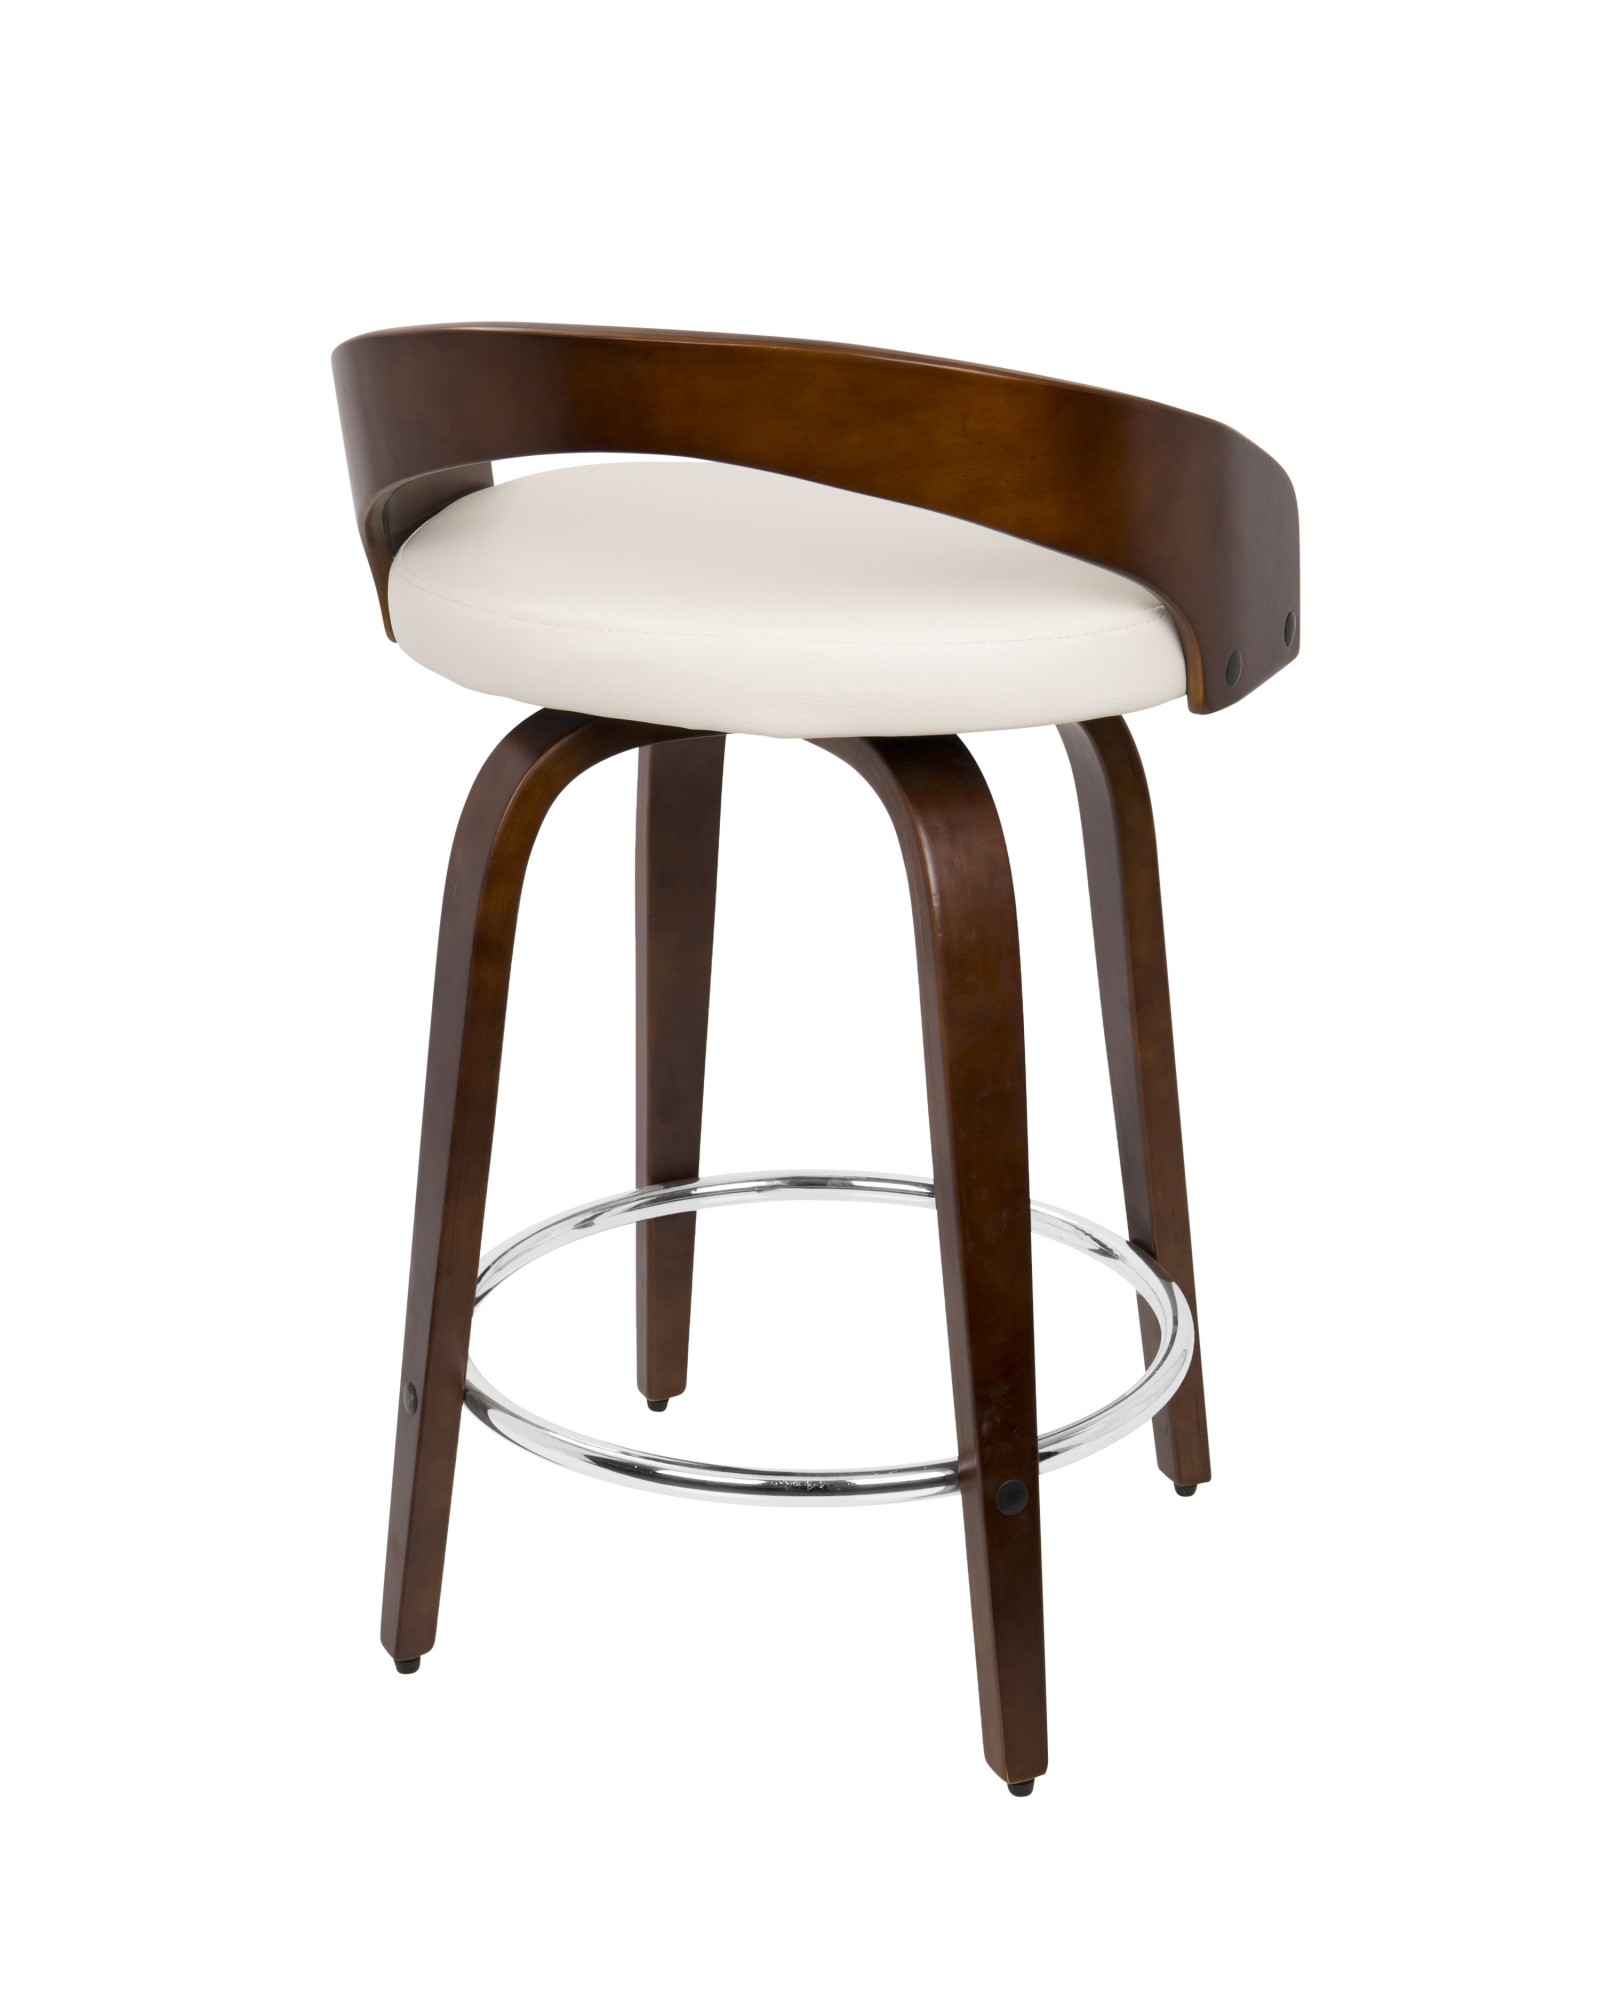 Grotto Mid-Century Modern Counter Stool with Swivel in Cherry with White Faux Leather